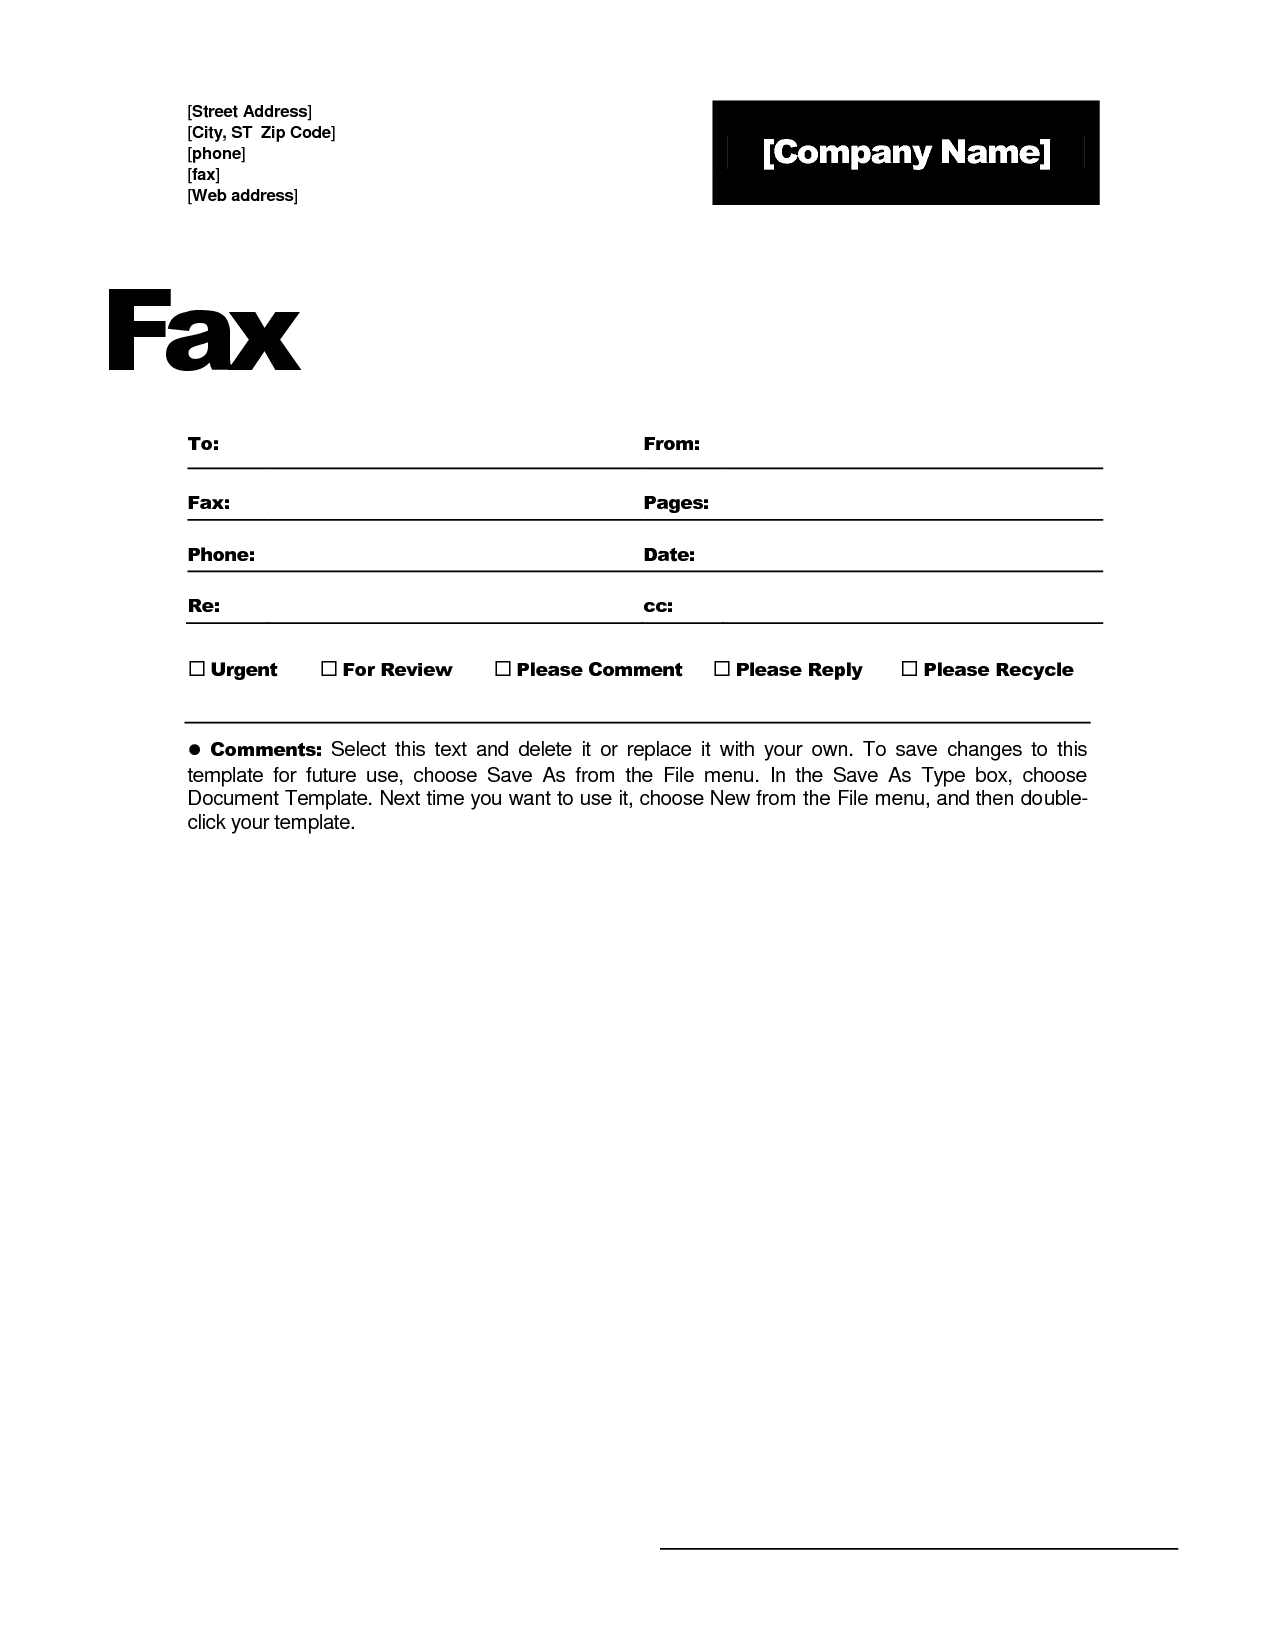 Fax Template In Word 2010 - Calep.midnightpig.co Throughout Fax Template Word 2010